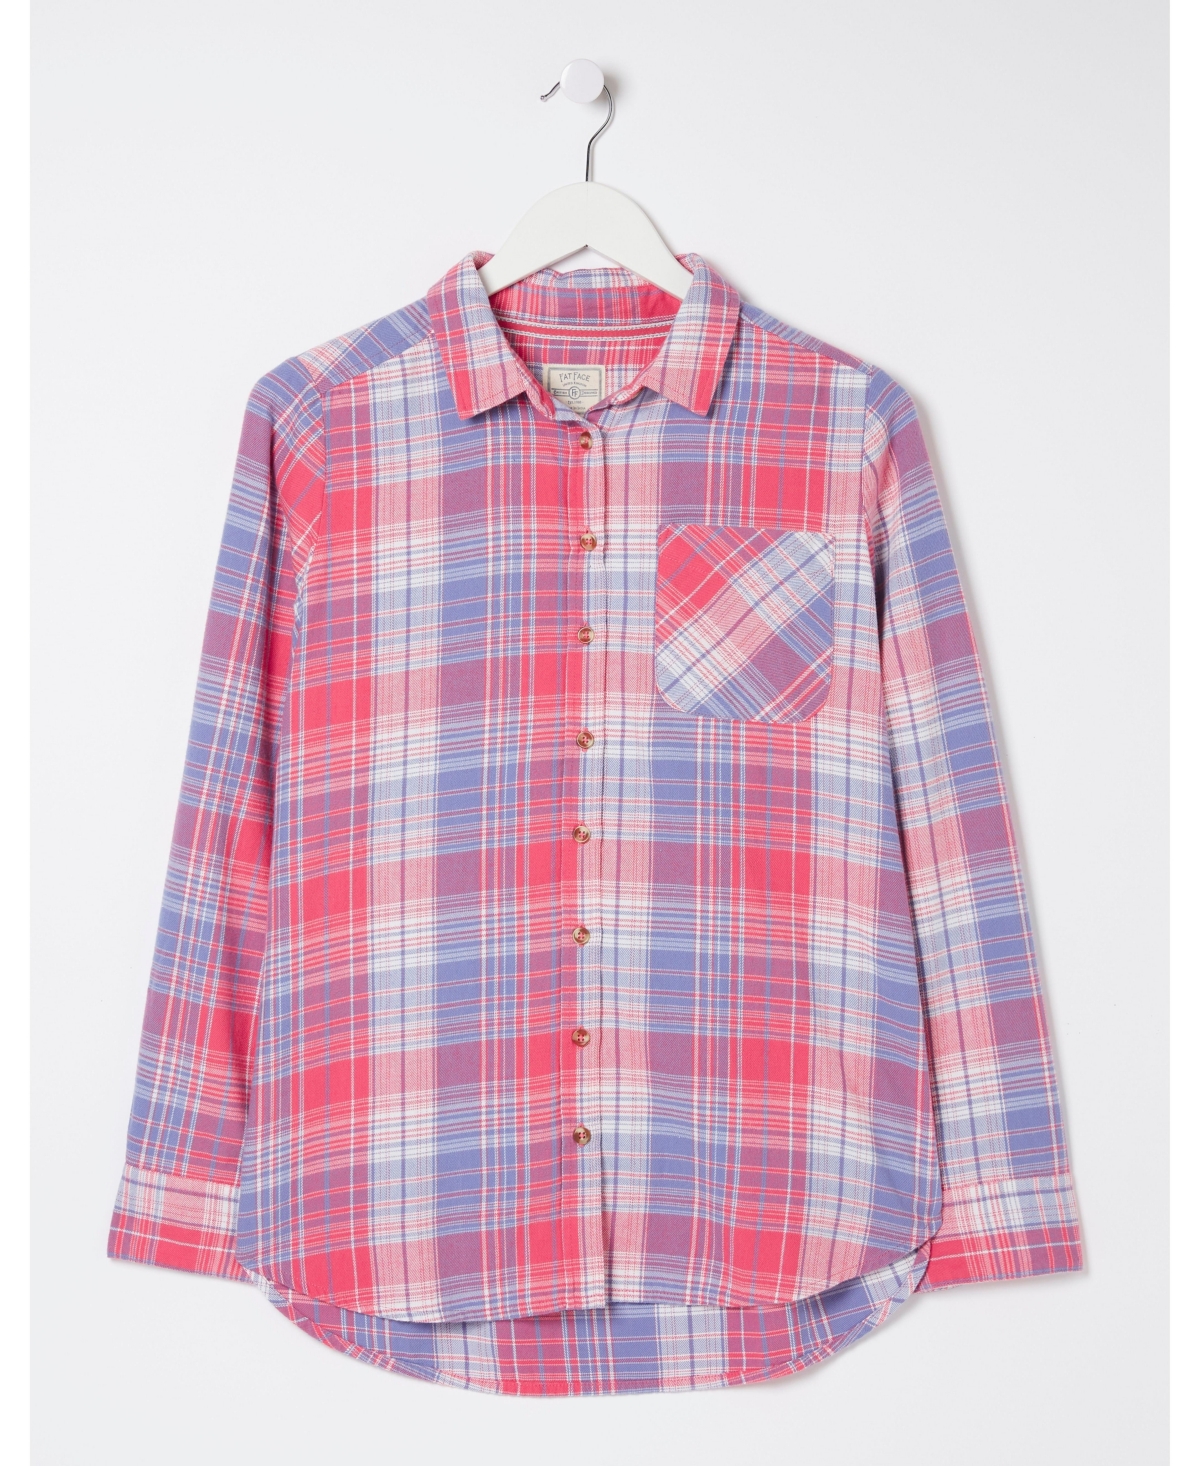 Women's Olivia Check Shirt - Muted Colors